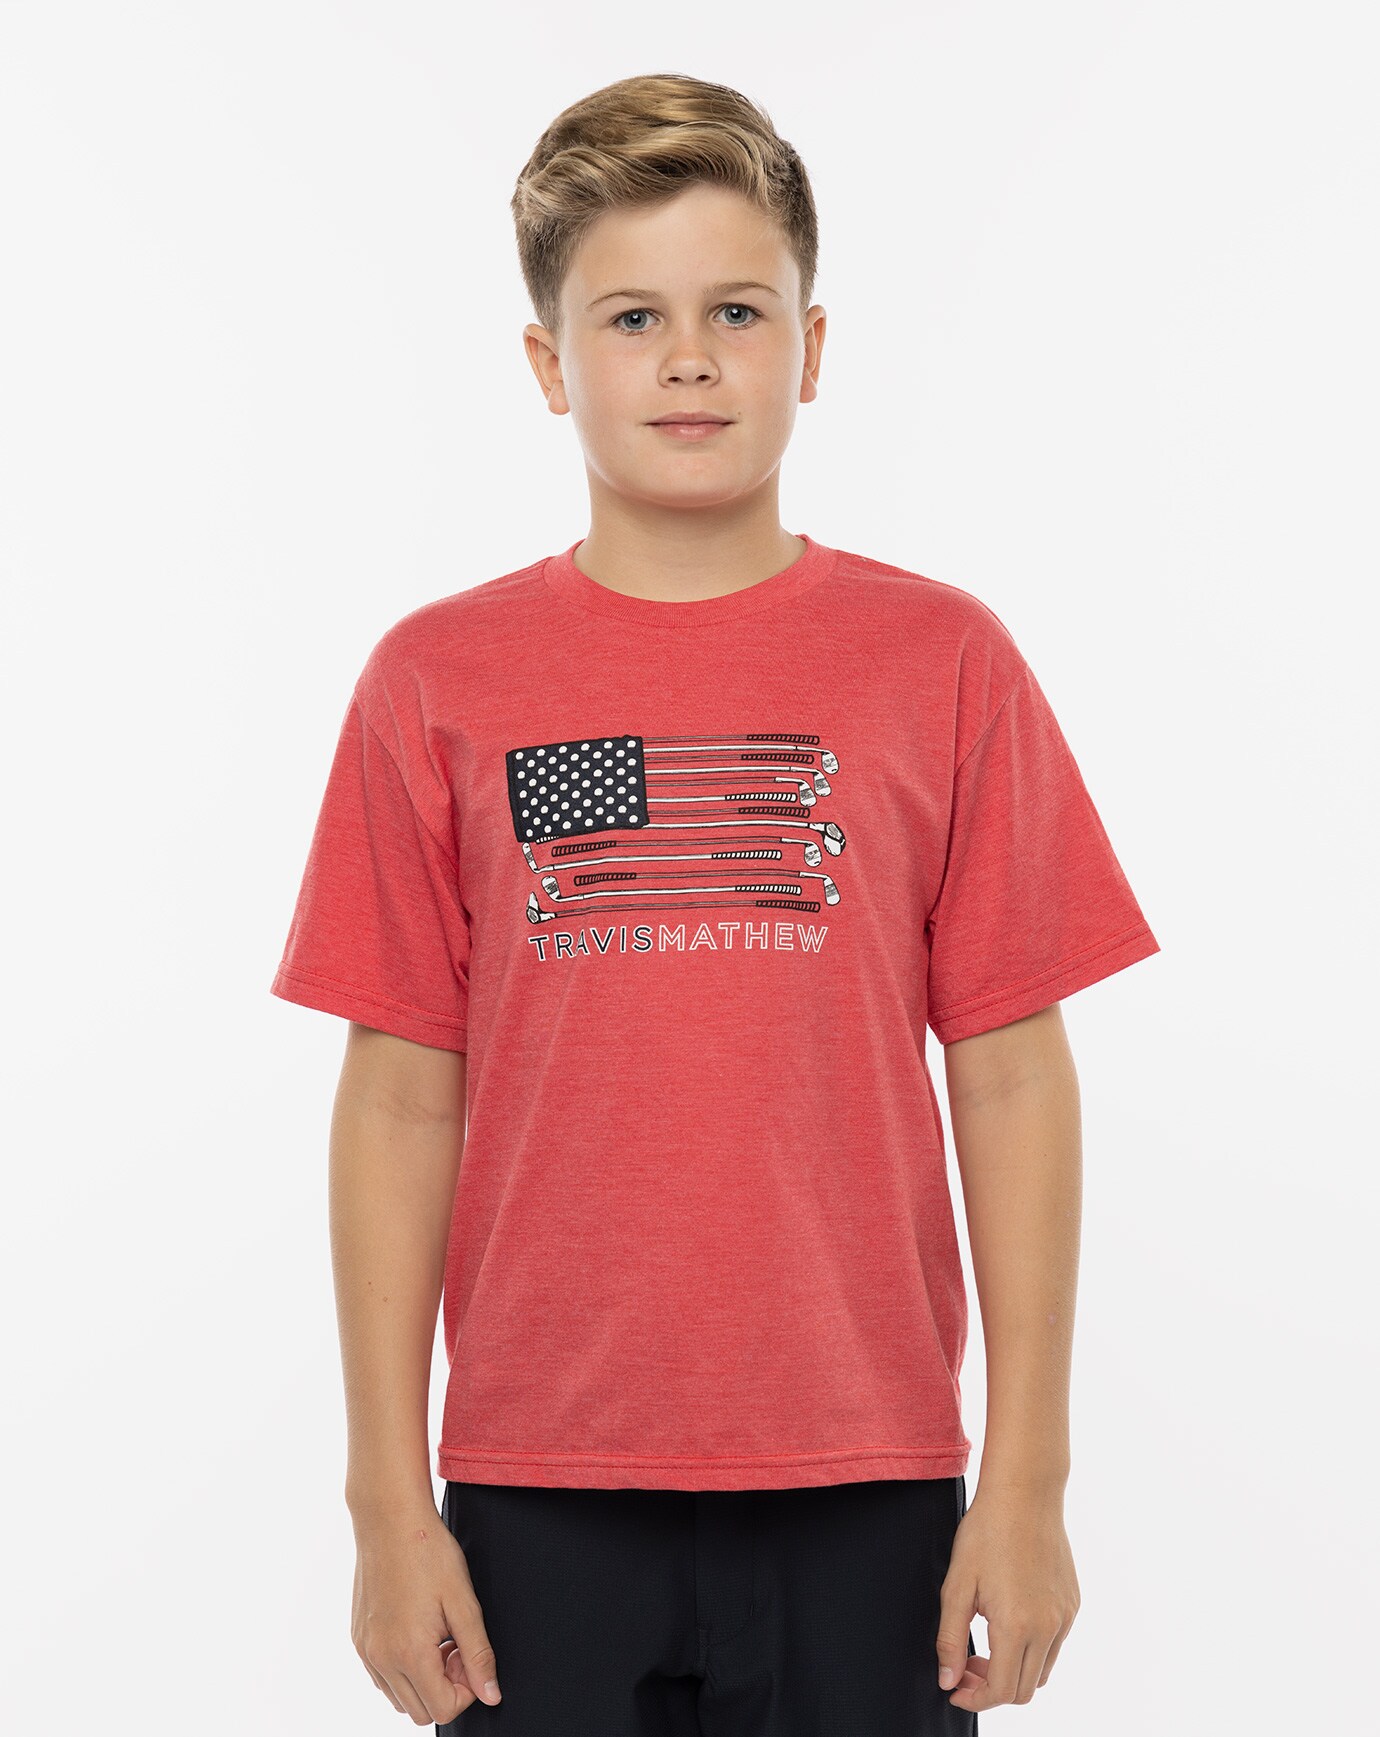 TEA PARTY YOUTH TEE_1BS121_6RED_